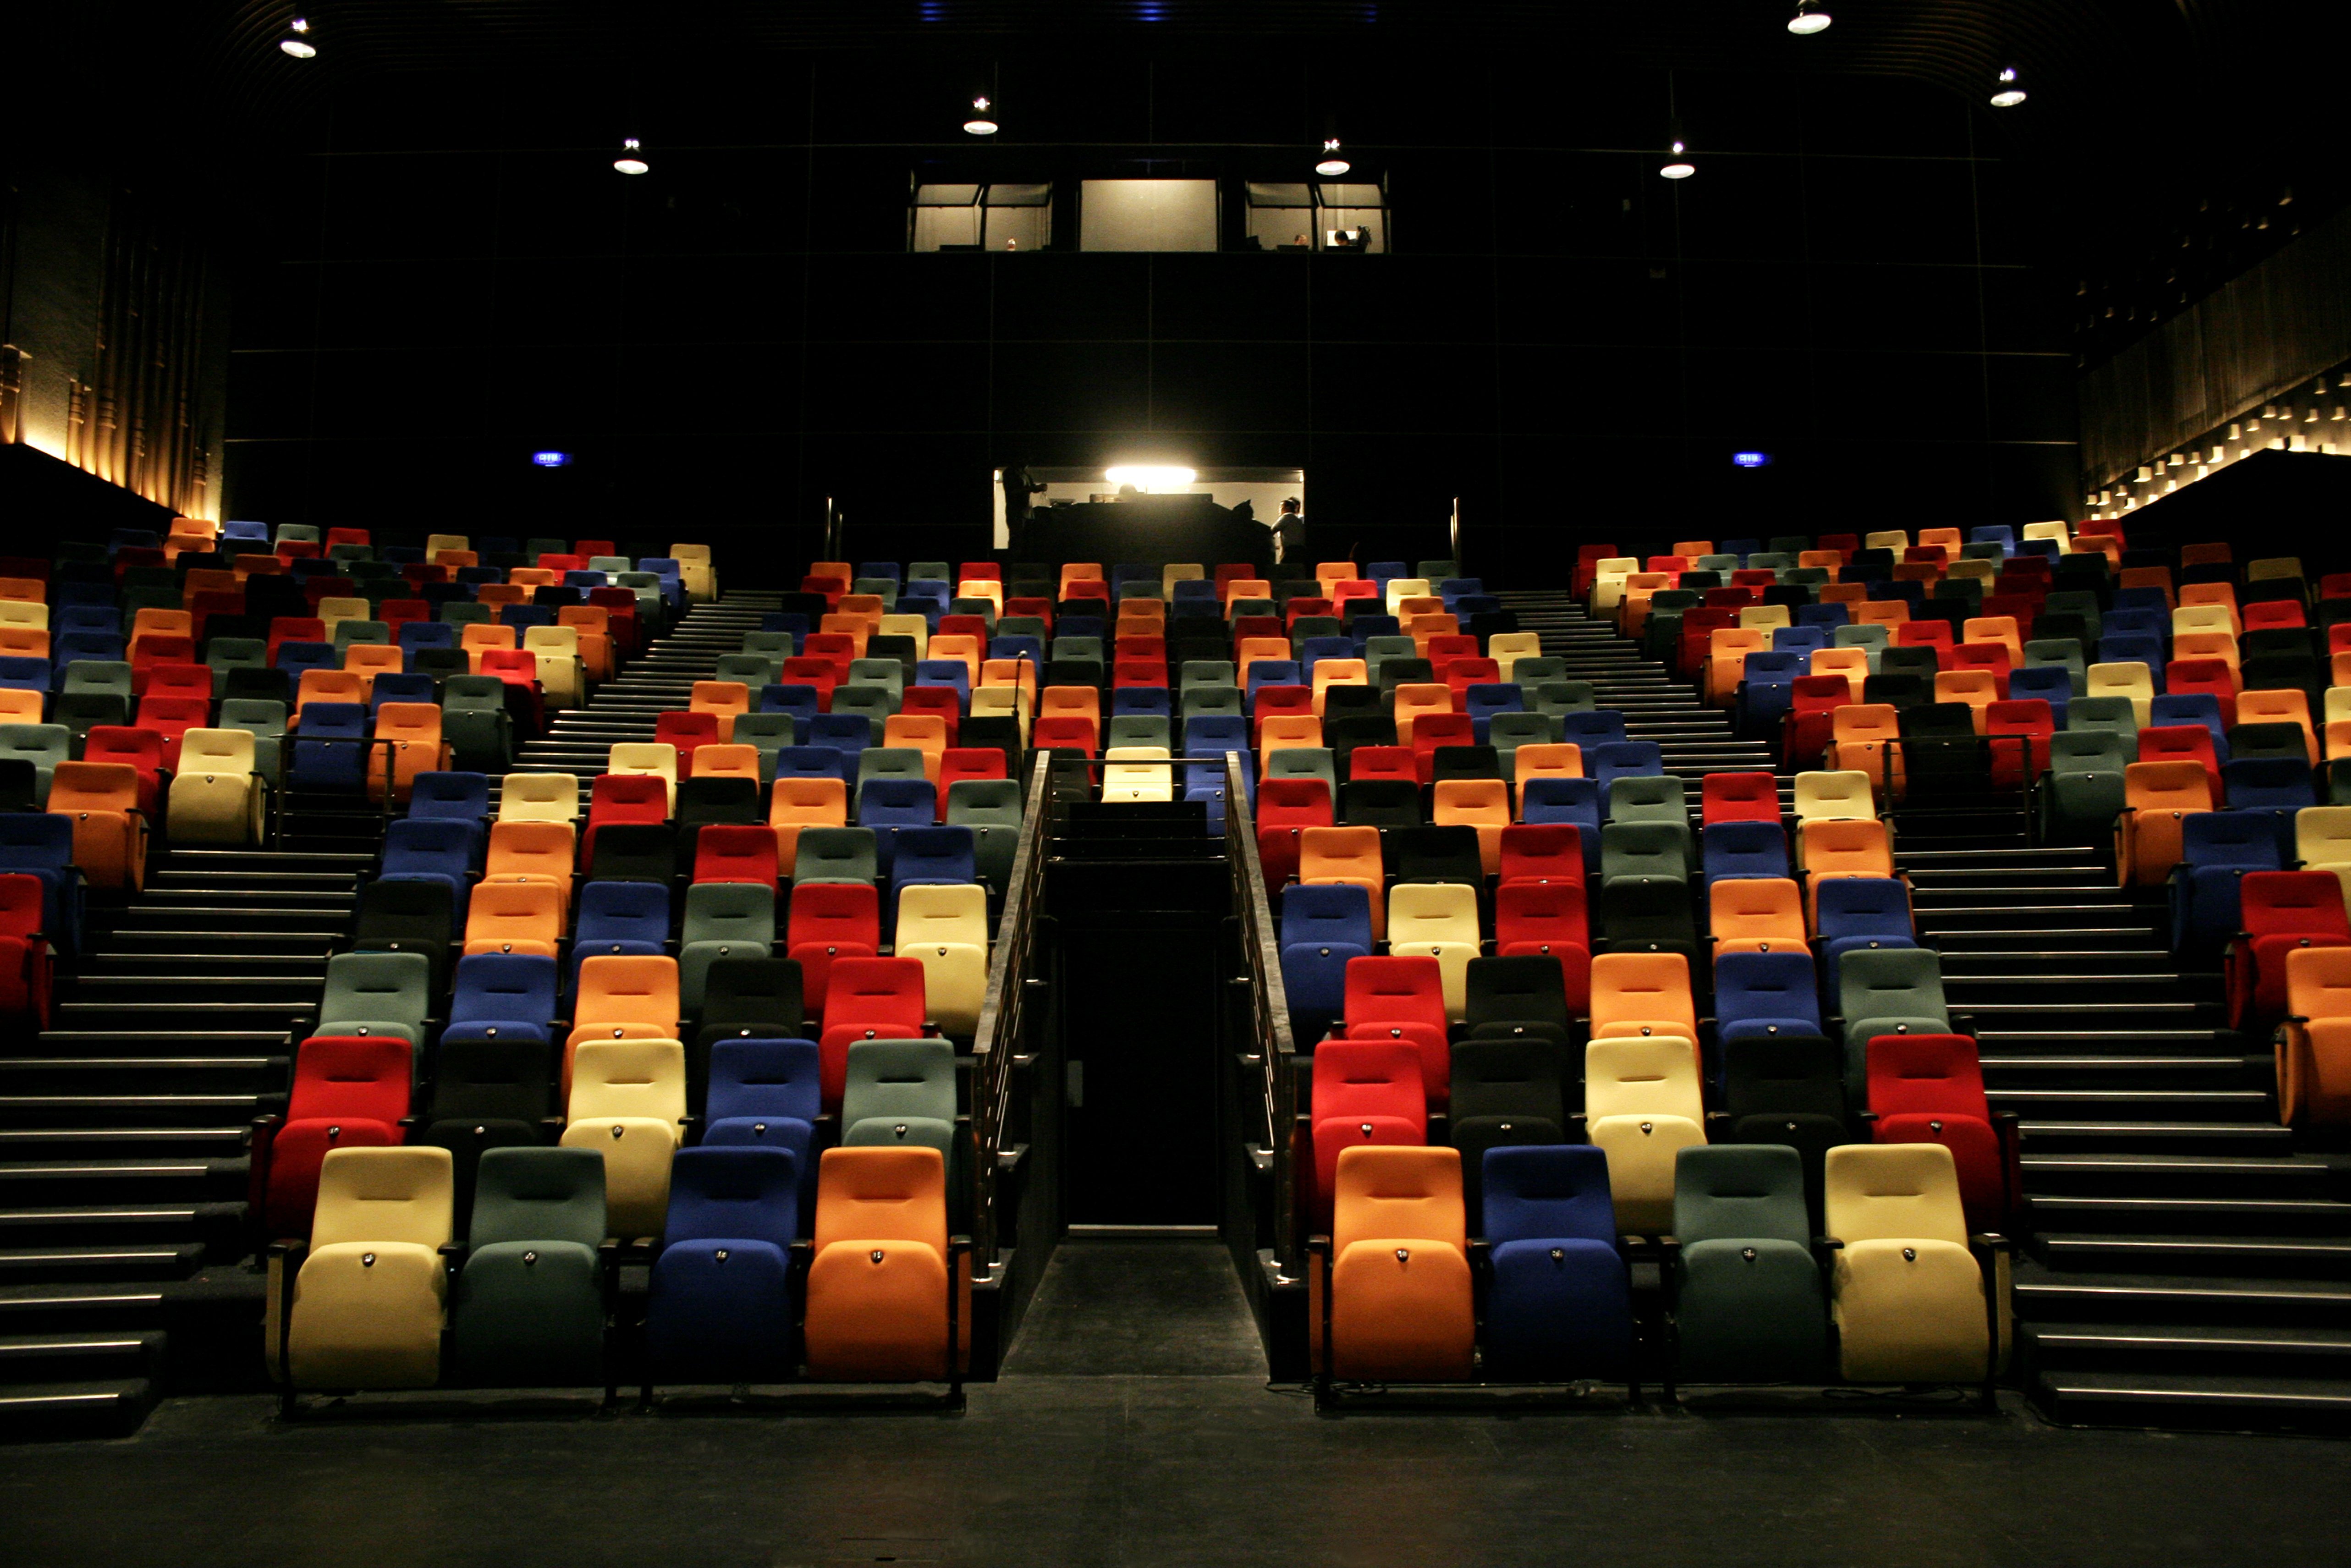 View of multicolored seats in the darkened auditorium of the new Kuala Lumpur Performing Arts Centre | Photo: Getty Images